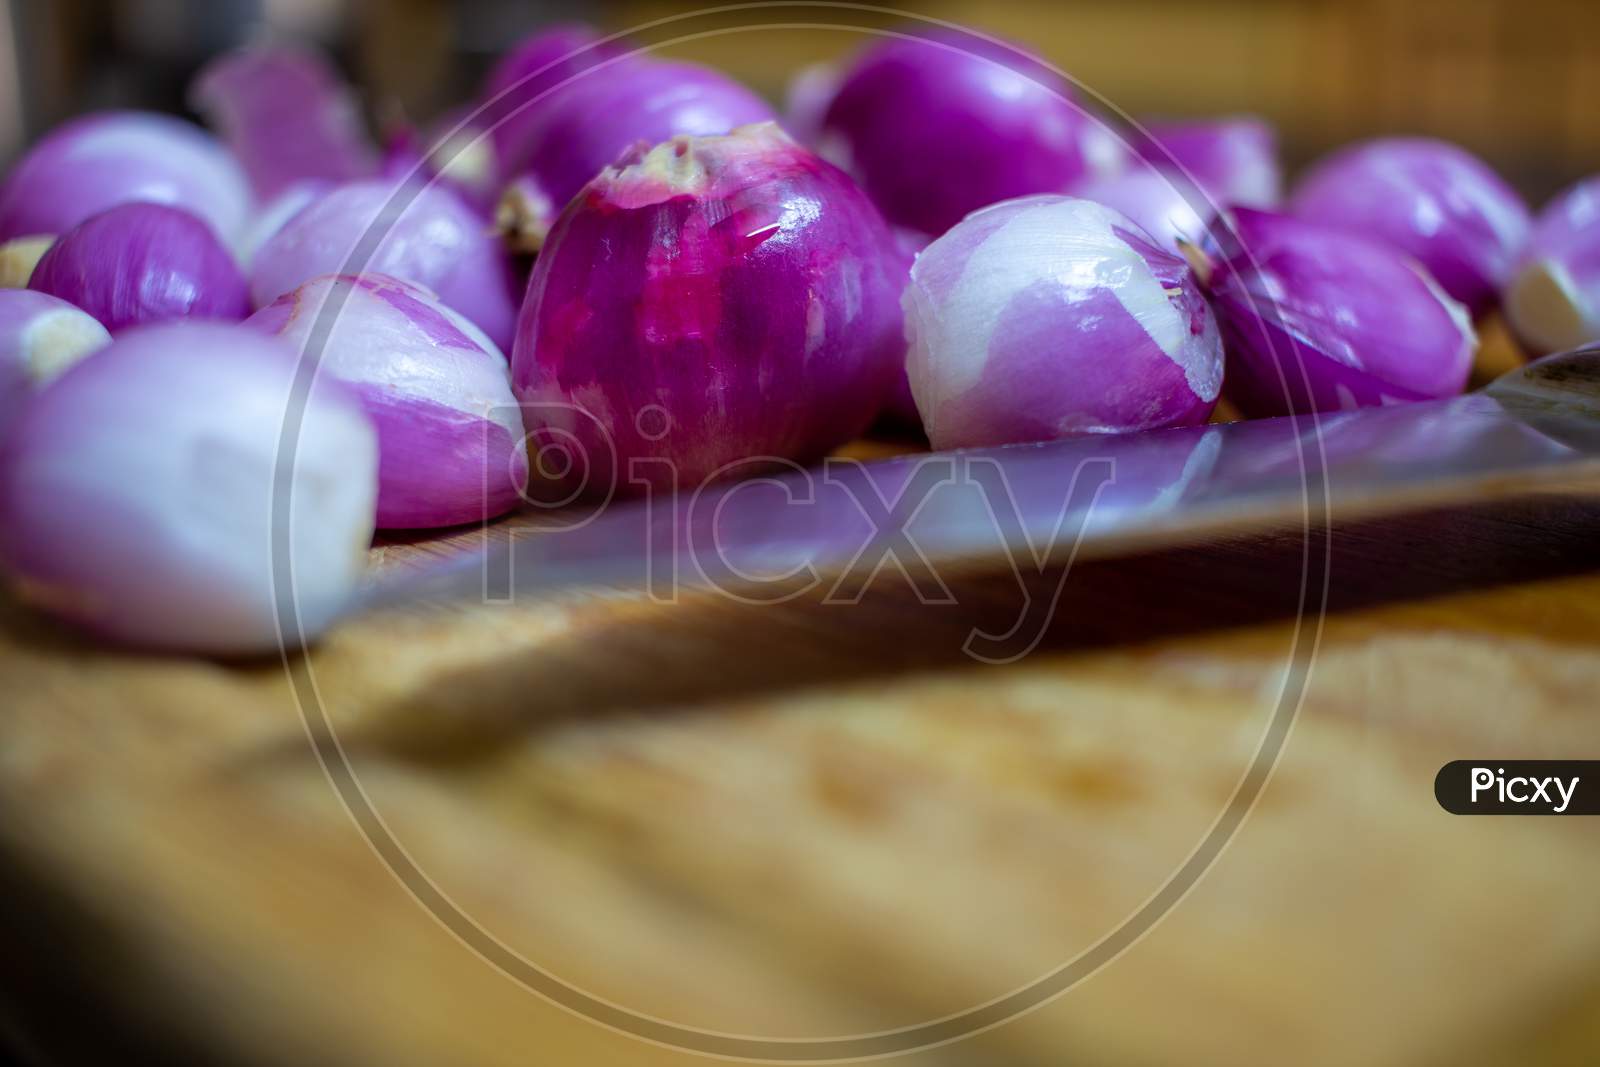 Peeled Onions (Shallots) Ready For Cut And Used In Cooking.